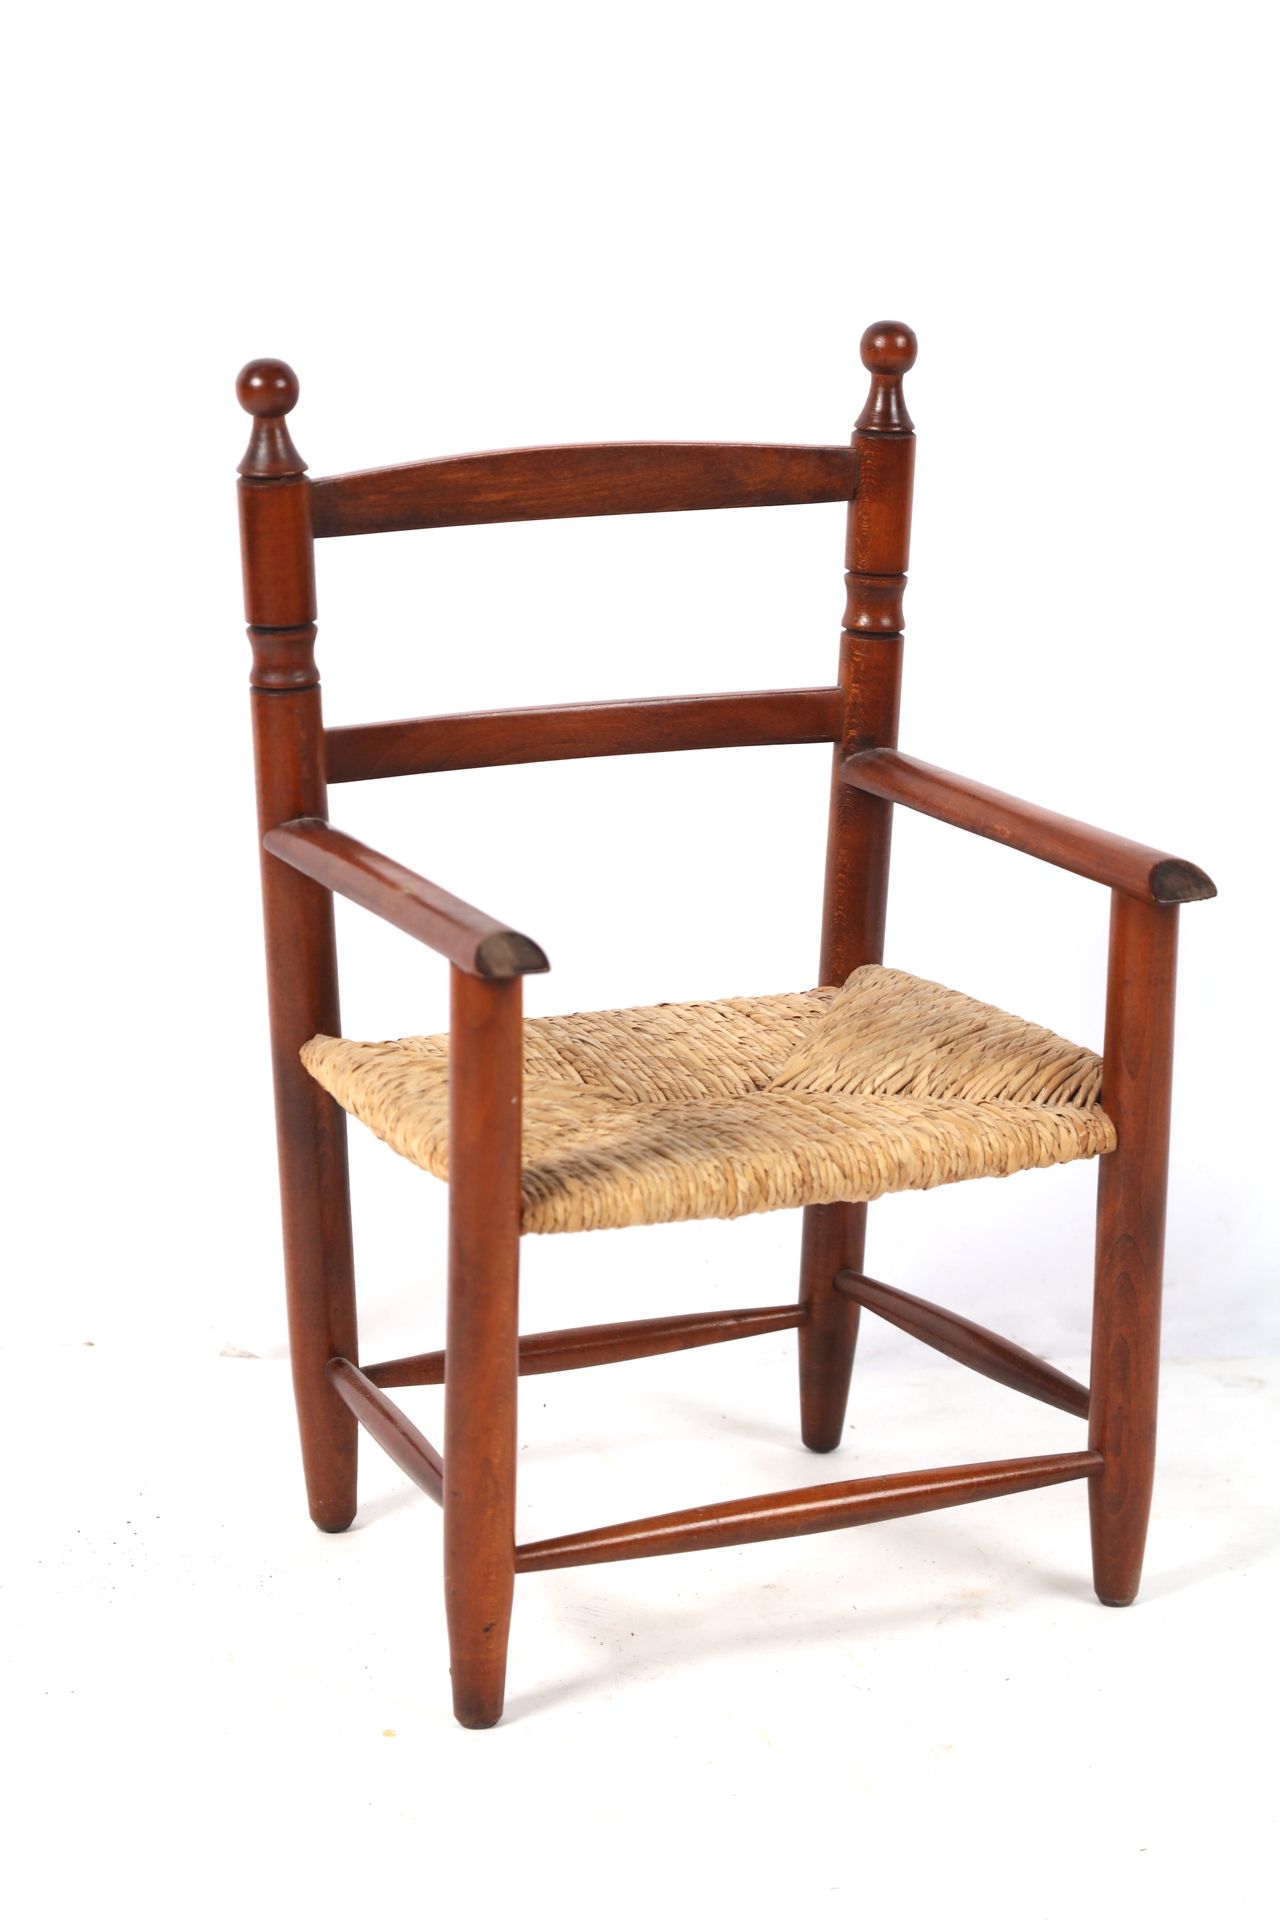 Null Child's armchair in natural wood, straw seat.